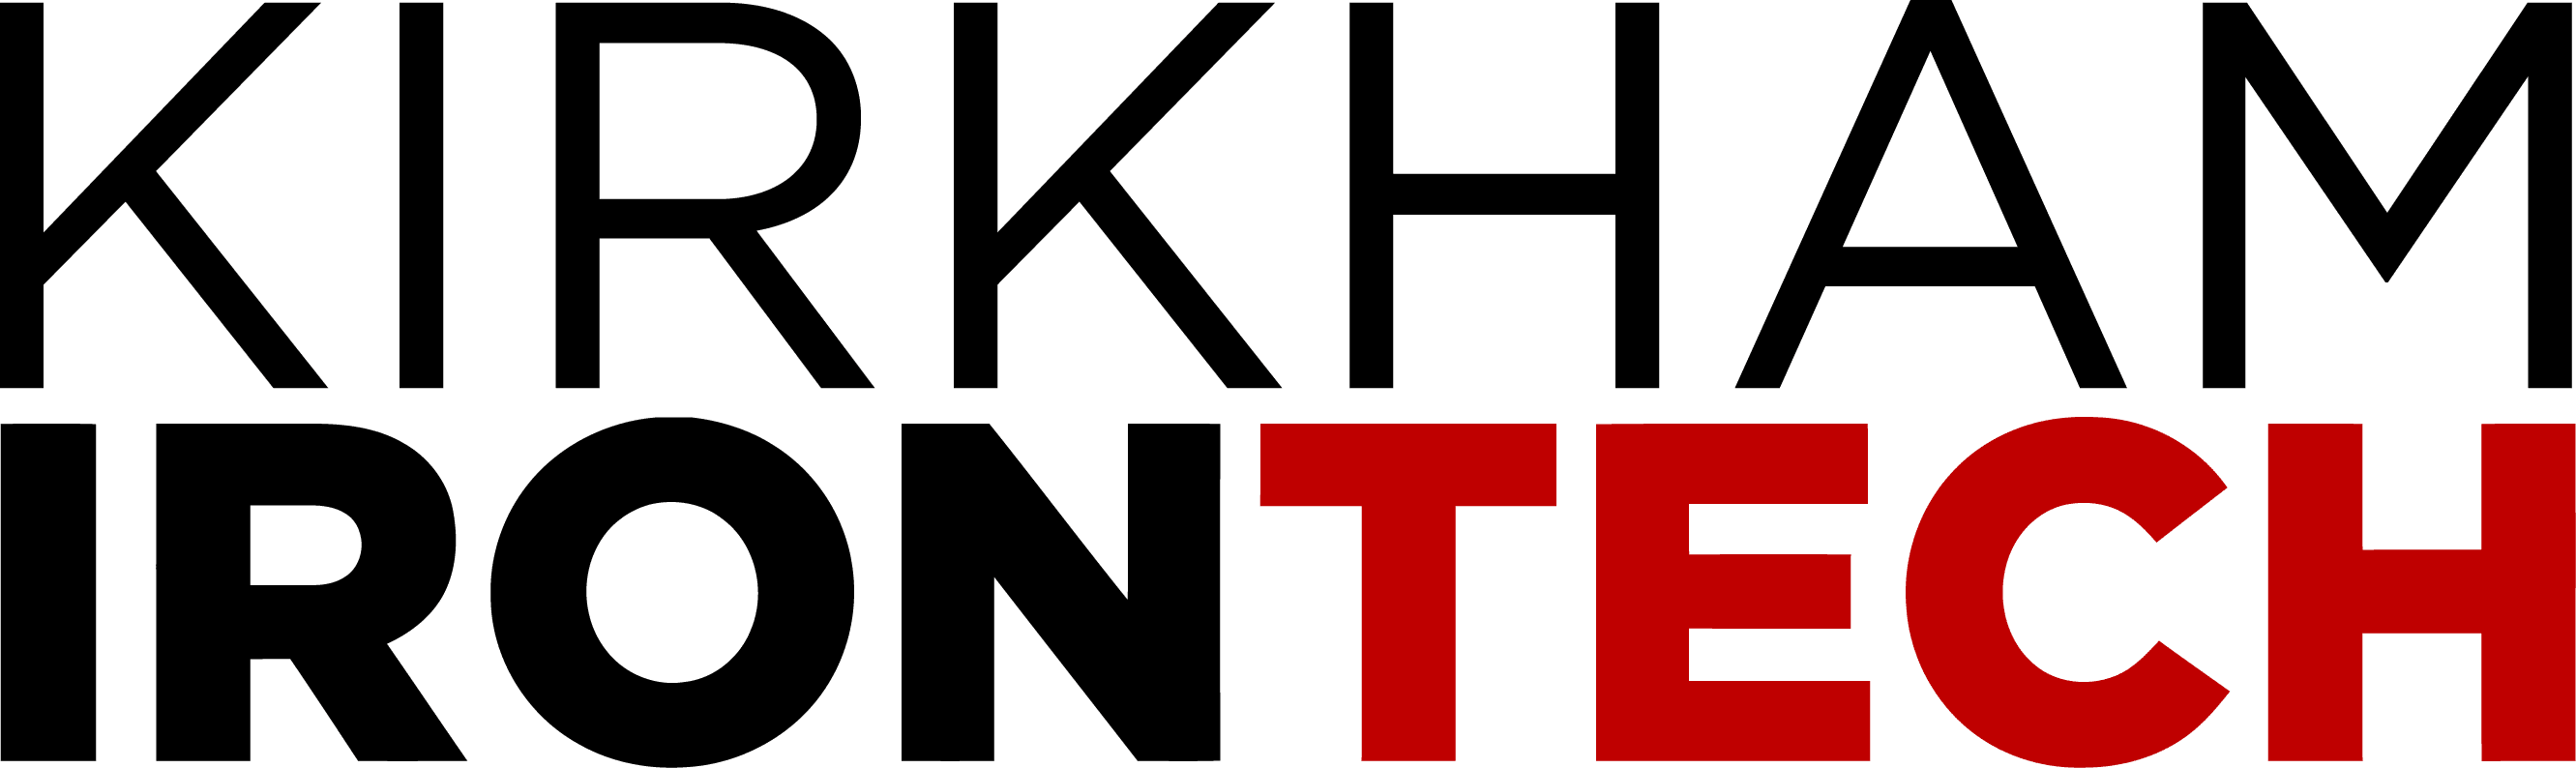 Kirkham IronTech Cybersecurity and IT Services